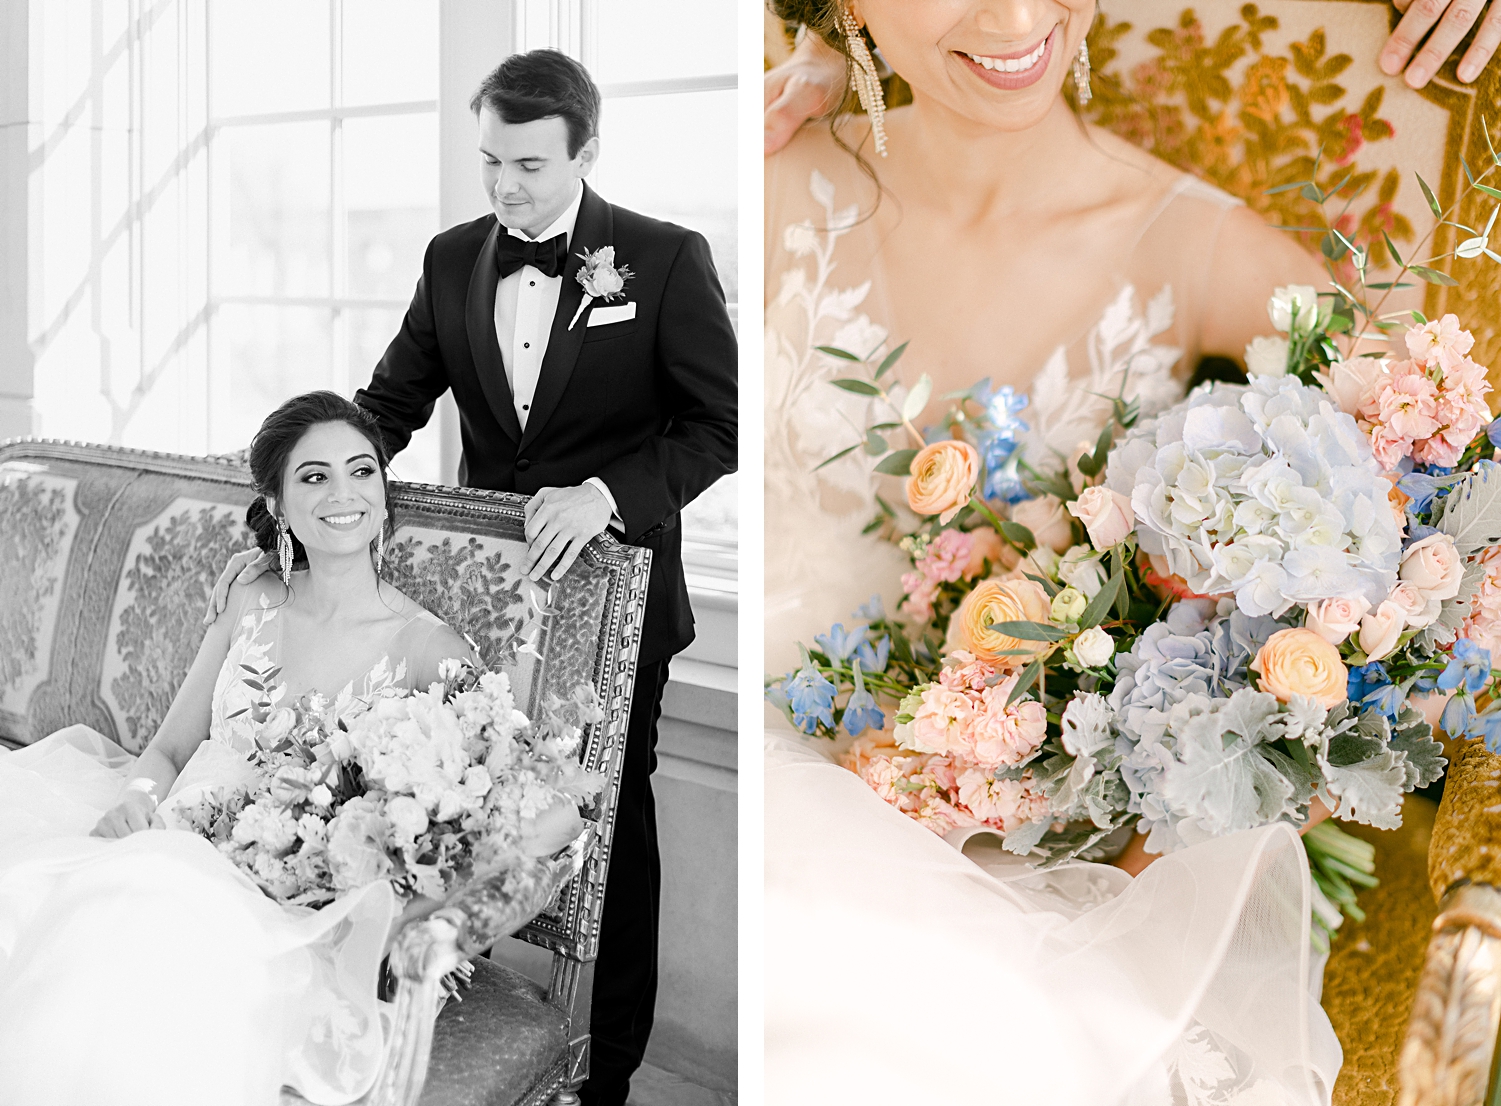 Bride and groom sitting holding colorful floral wedding bouquet smiling